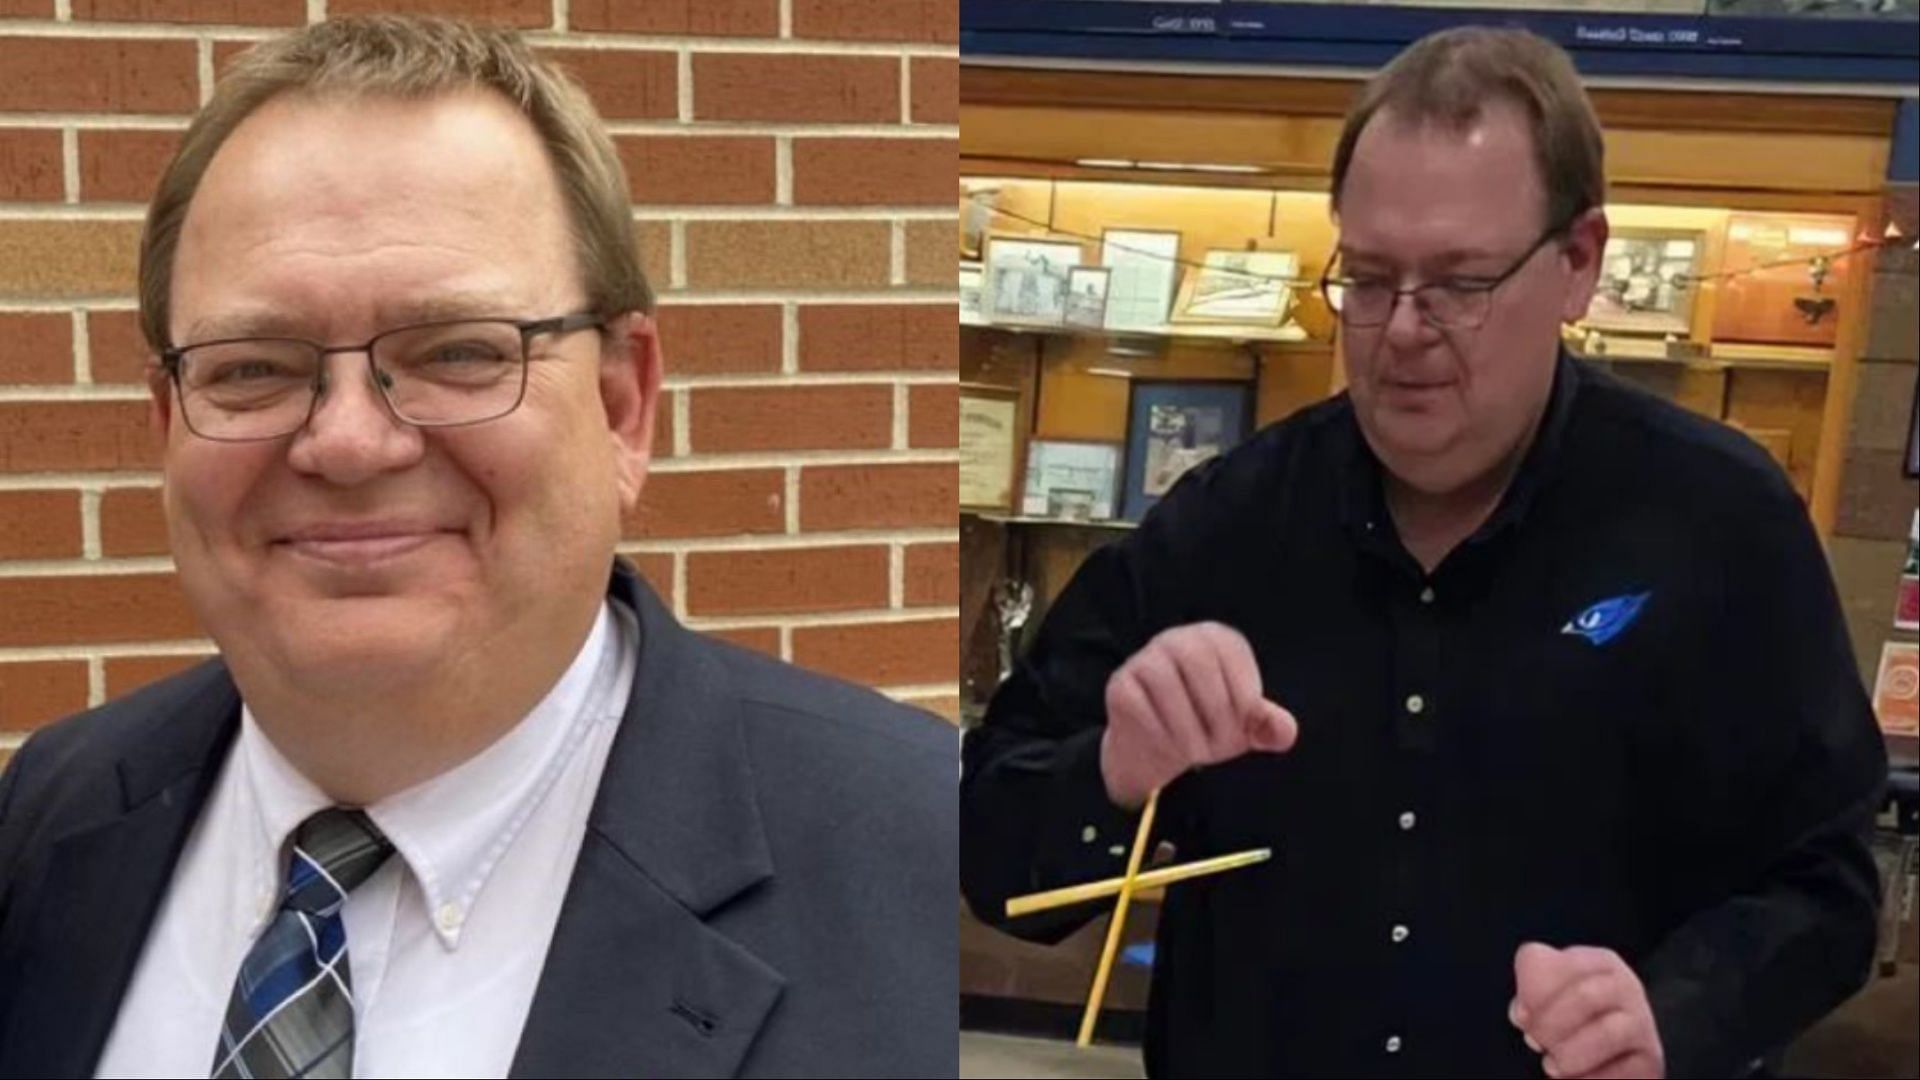 Fundraiser raises over $160K as Iowa principal dies after succumbing to school shooting wounds (Image via JoJoFromJerz and The_Bluejay_Way/X) 